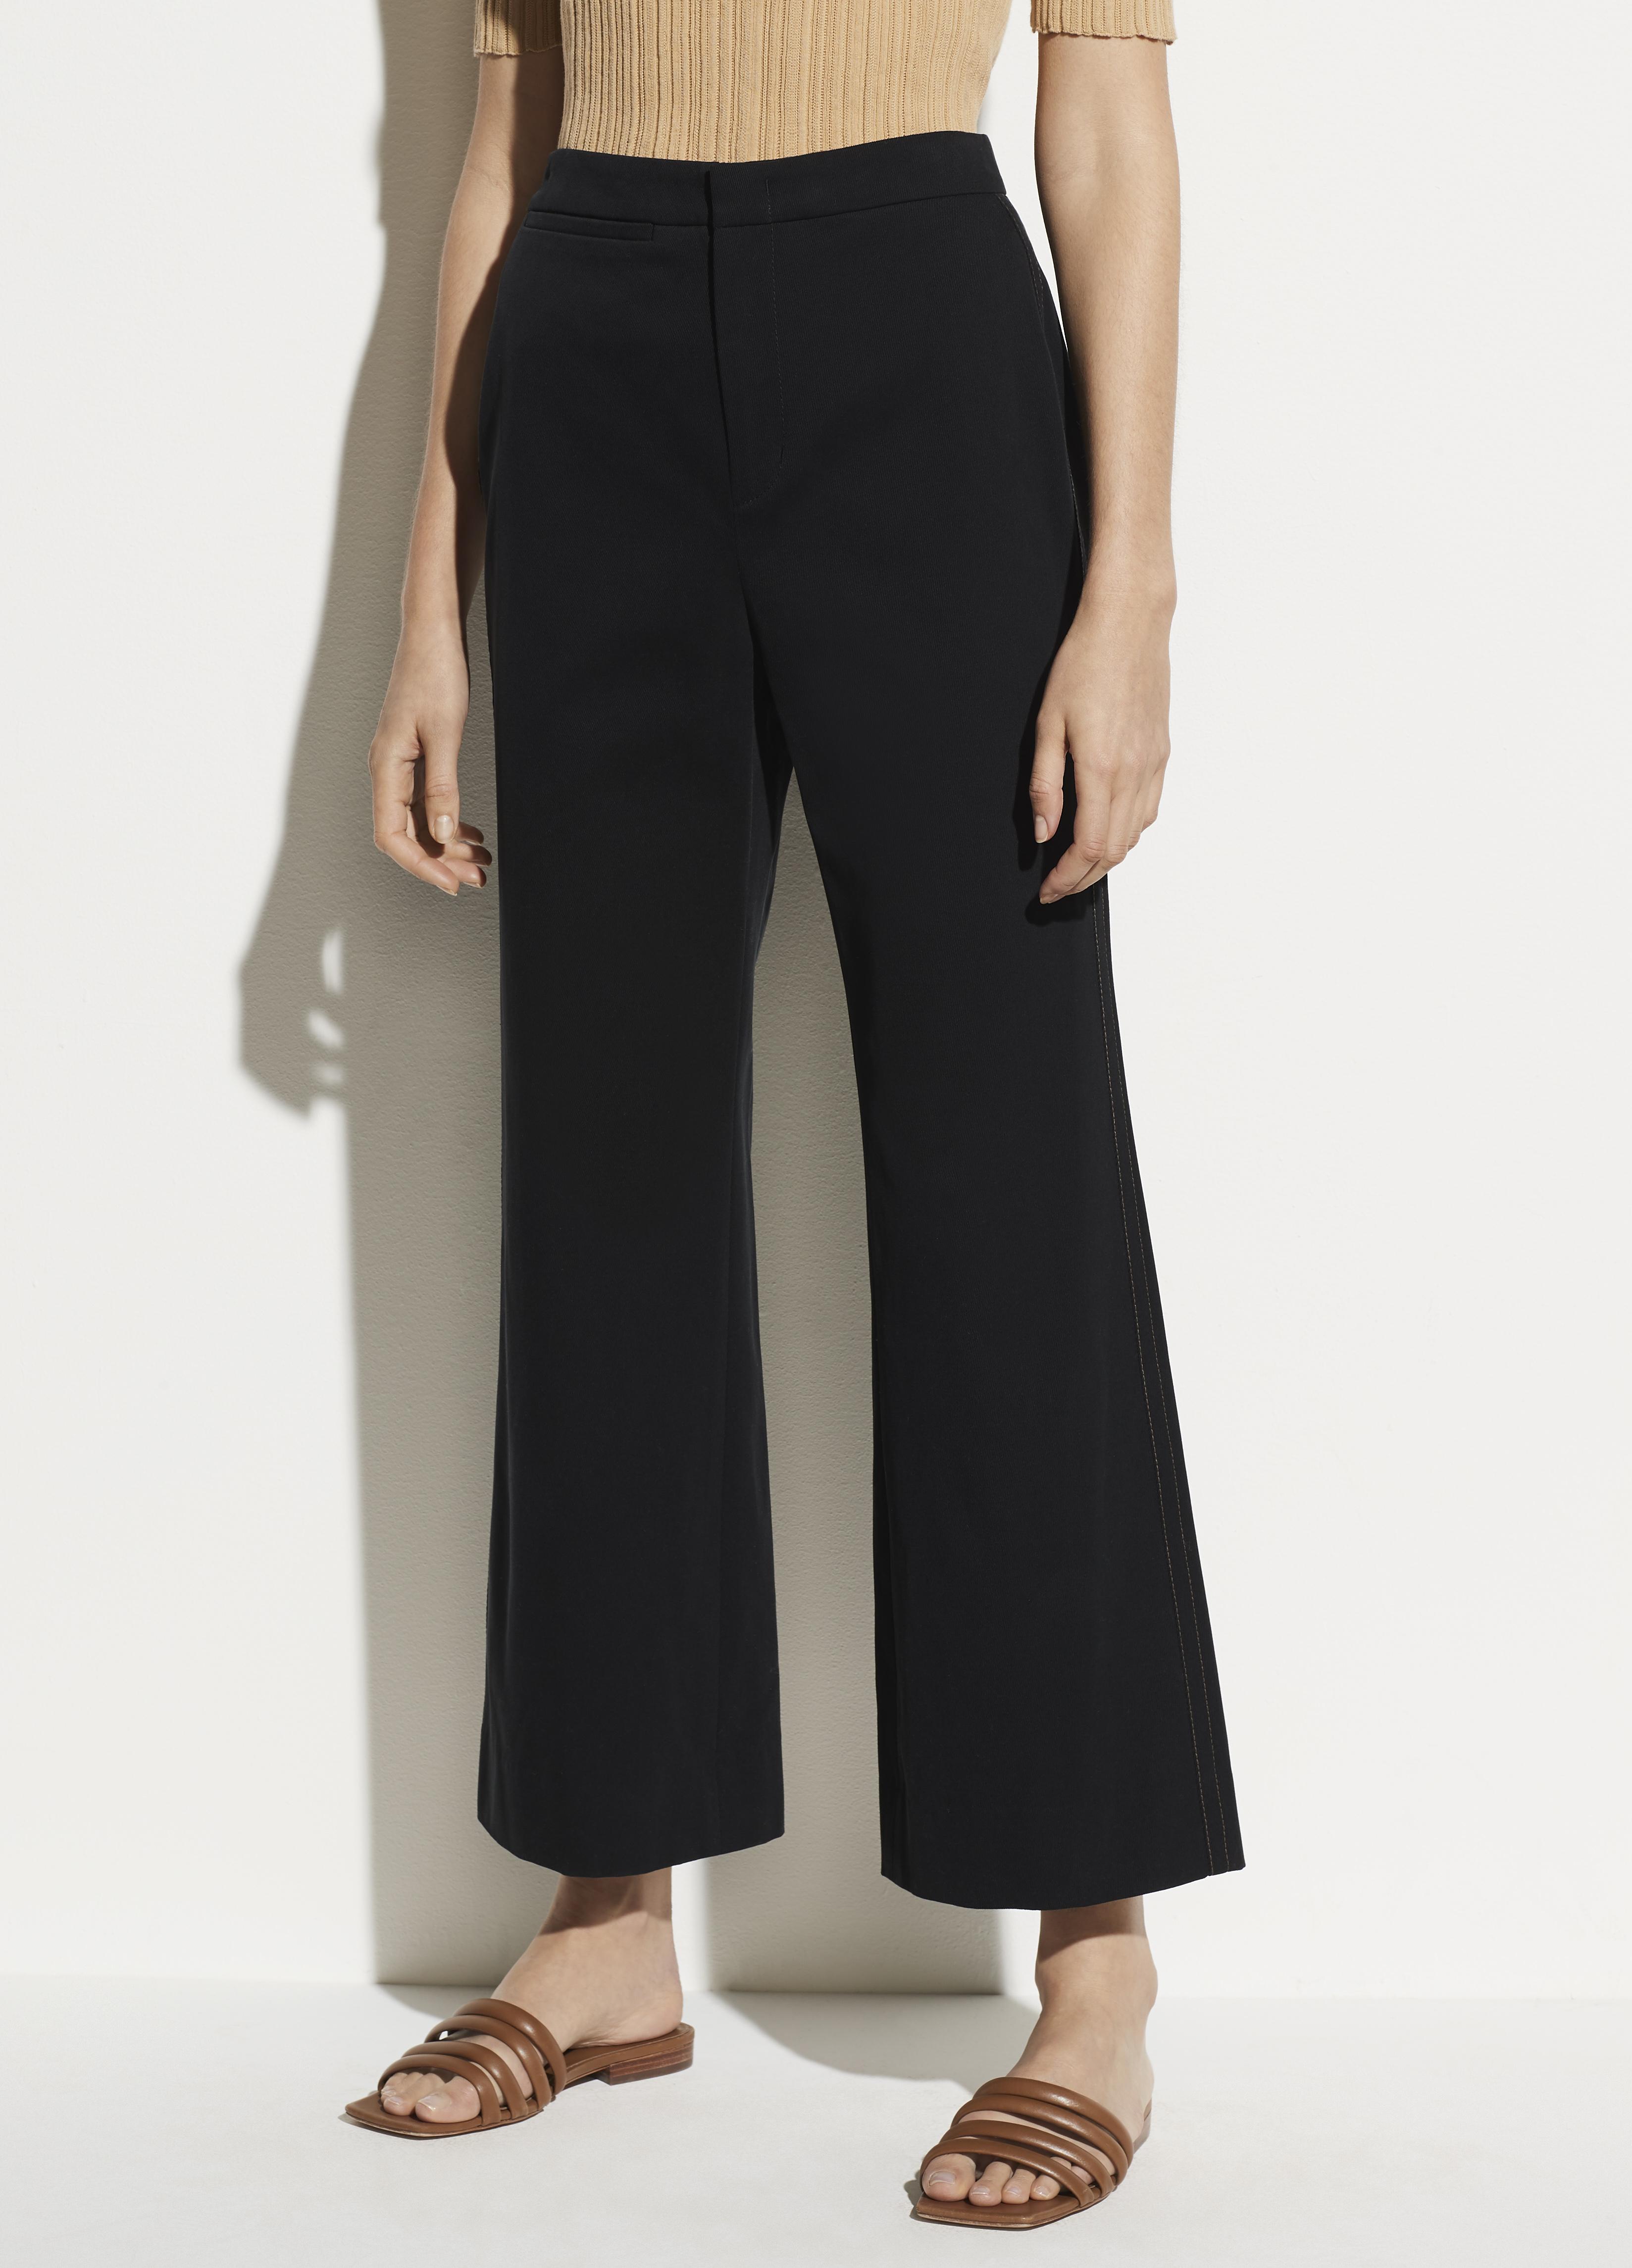 Vince Cotton Casual Cropped Flare Pant in Black - Lyst